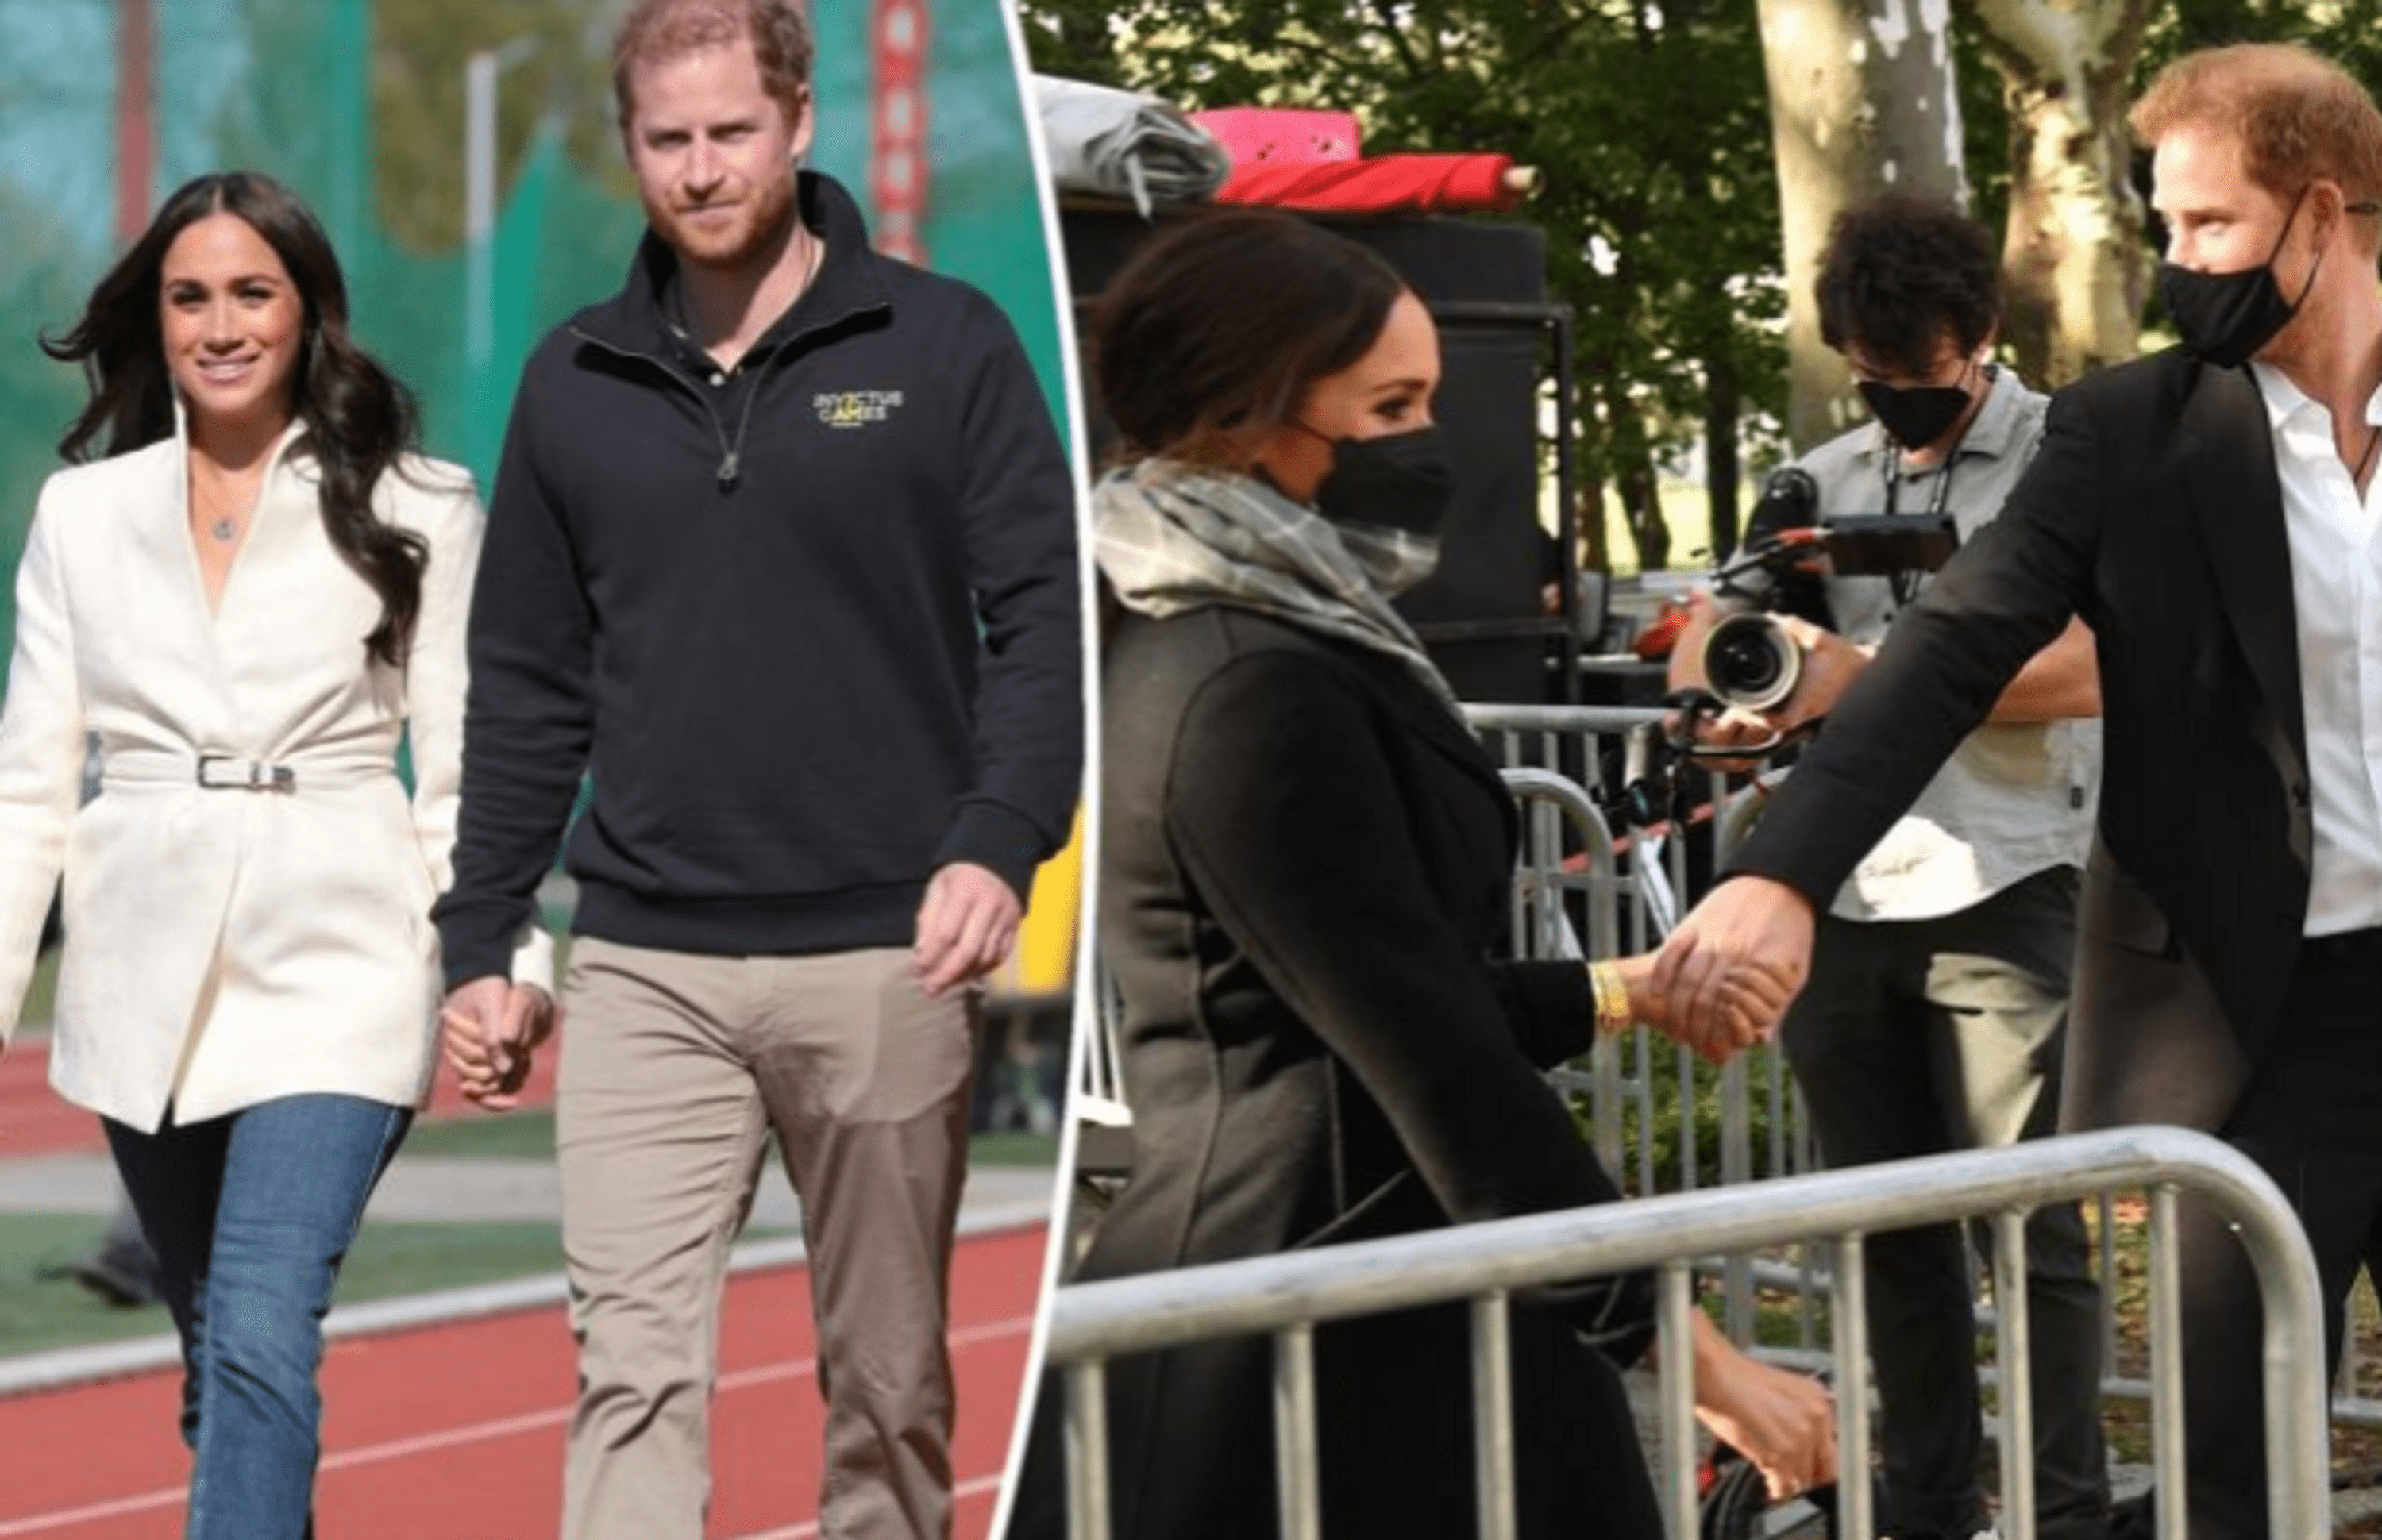 Documentary series about Prince Harry and Meghan Markle is coming to Netflix